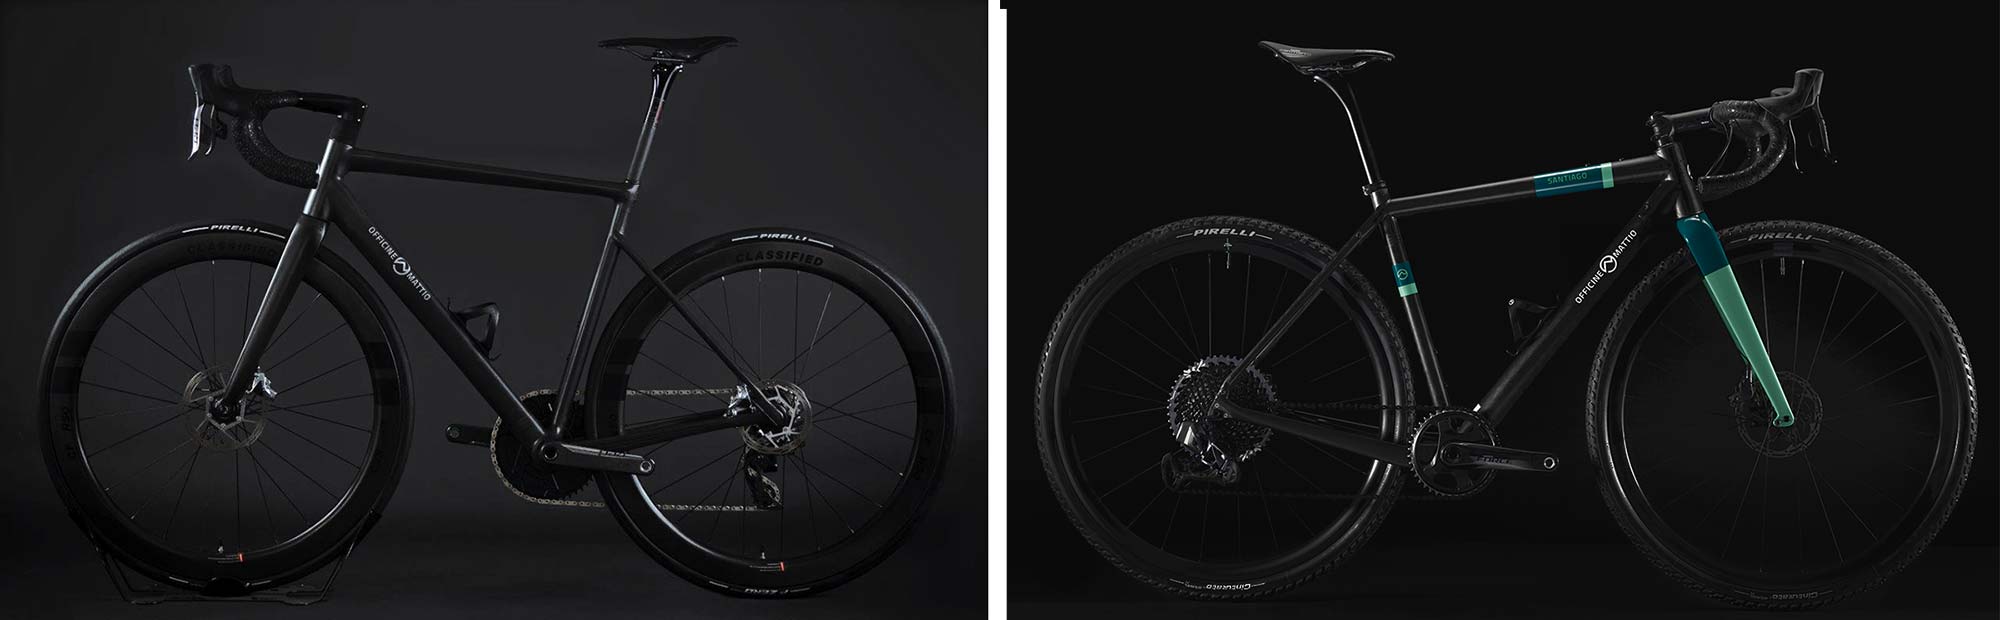 Officine Mattio carbon road & gravel bikes made-in-Italy, with Classified PowerShift wheels